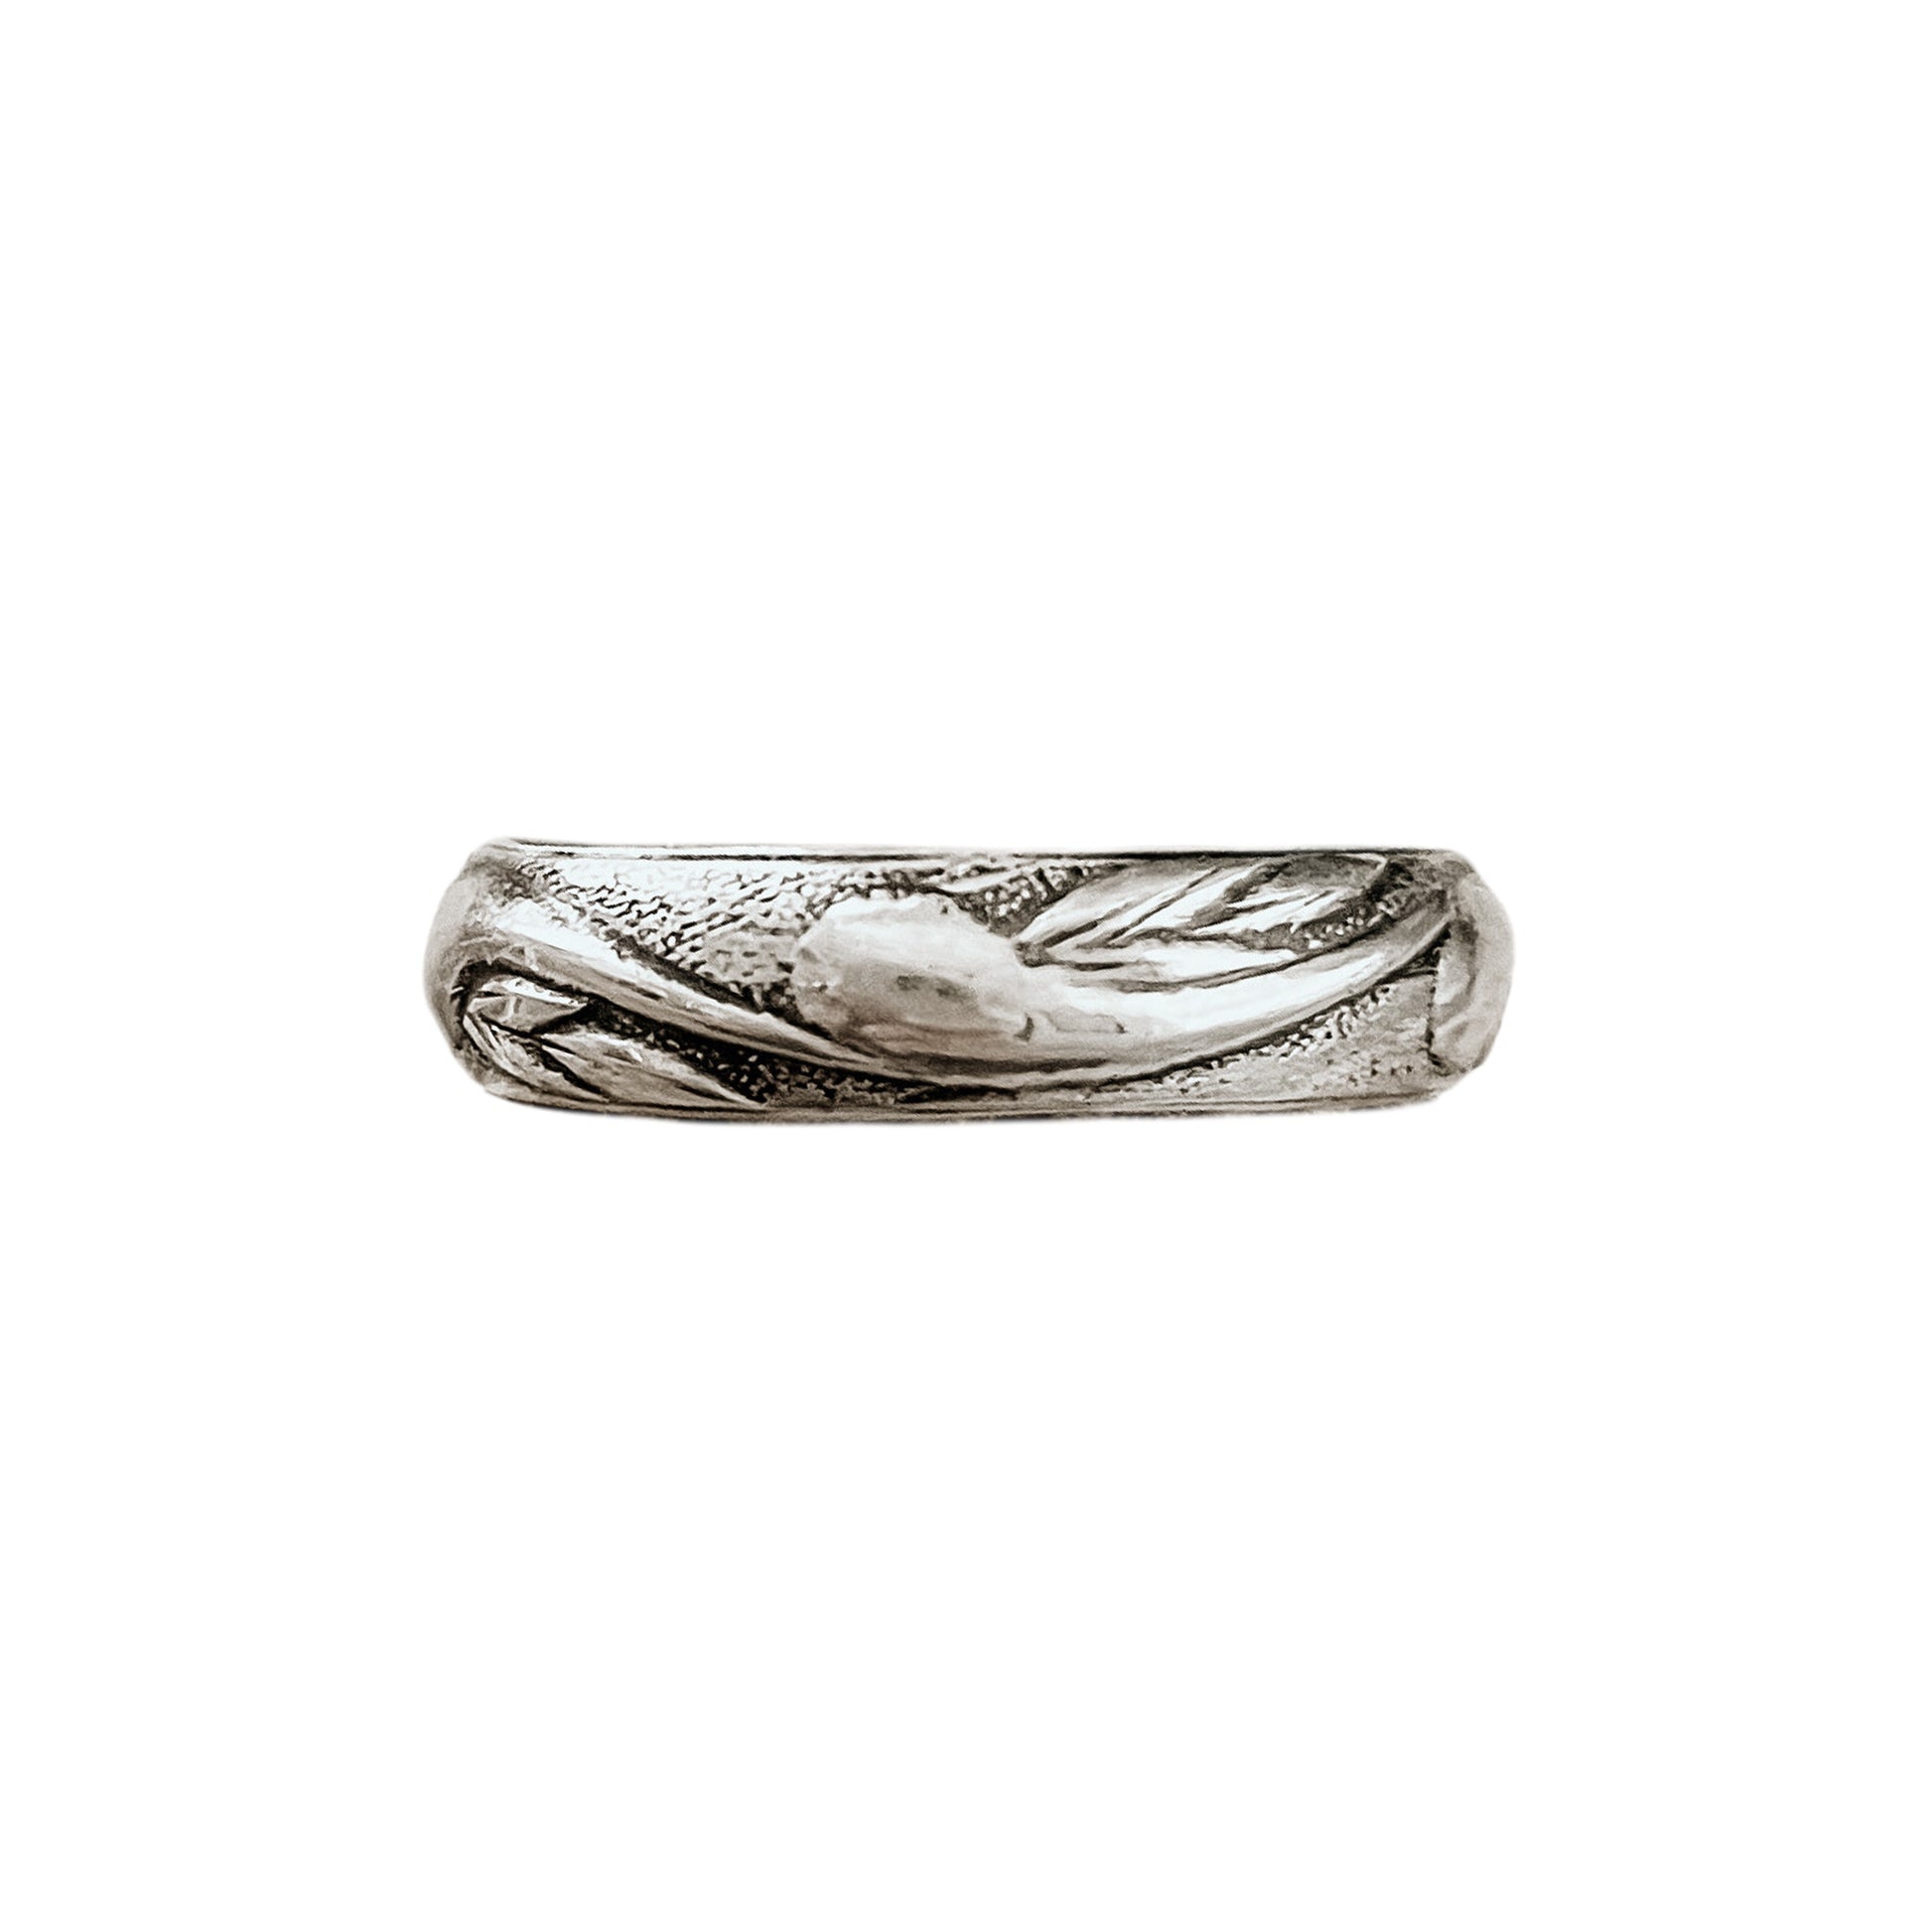 Western Nouveau Stacking Ring shown in antiqued finish.